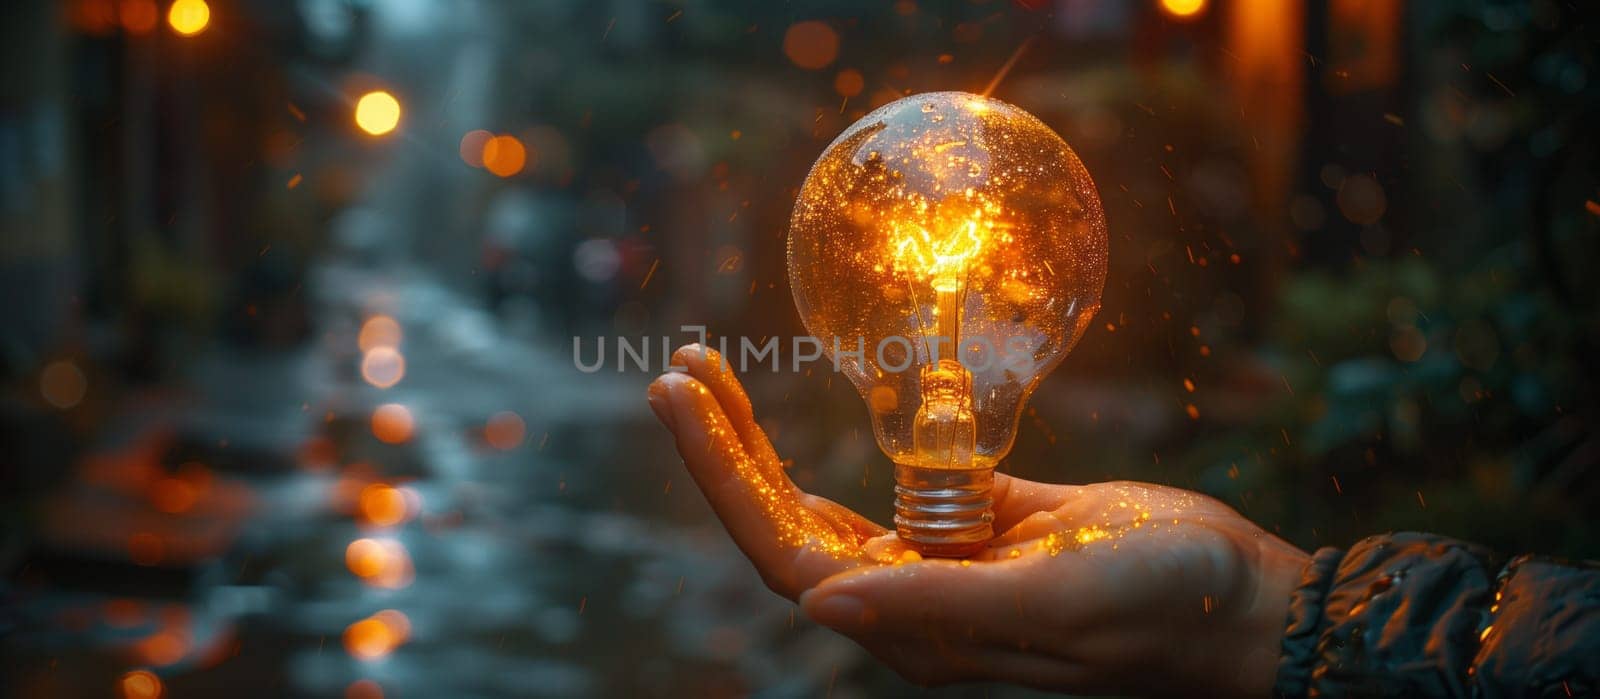 With a passion for art and science, the person carefully examines the intricate details of the light bulb, capturing its beauty through macro photography